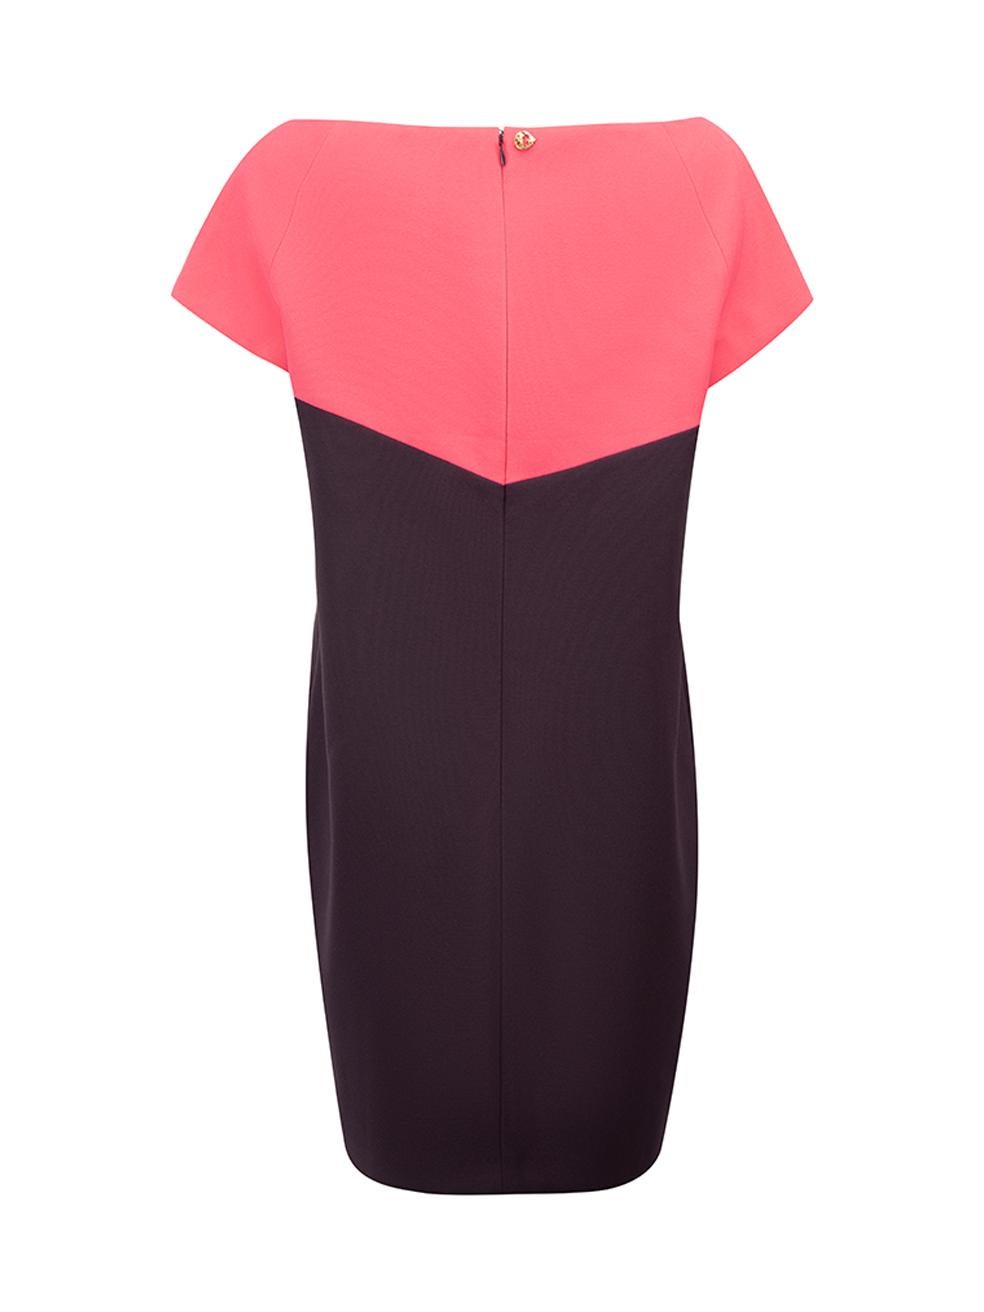 Purple & Pink Colour Block Dress Size L In Good Condition For Sale In London, GB